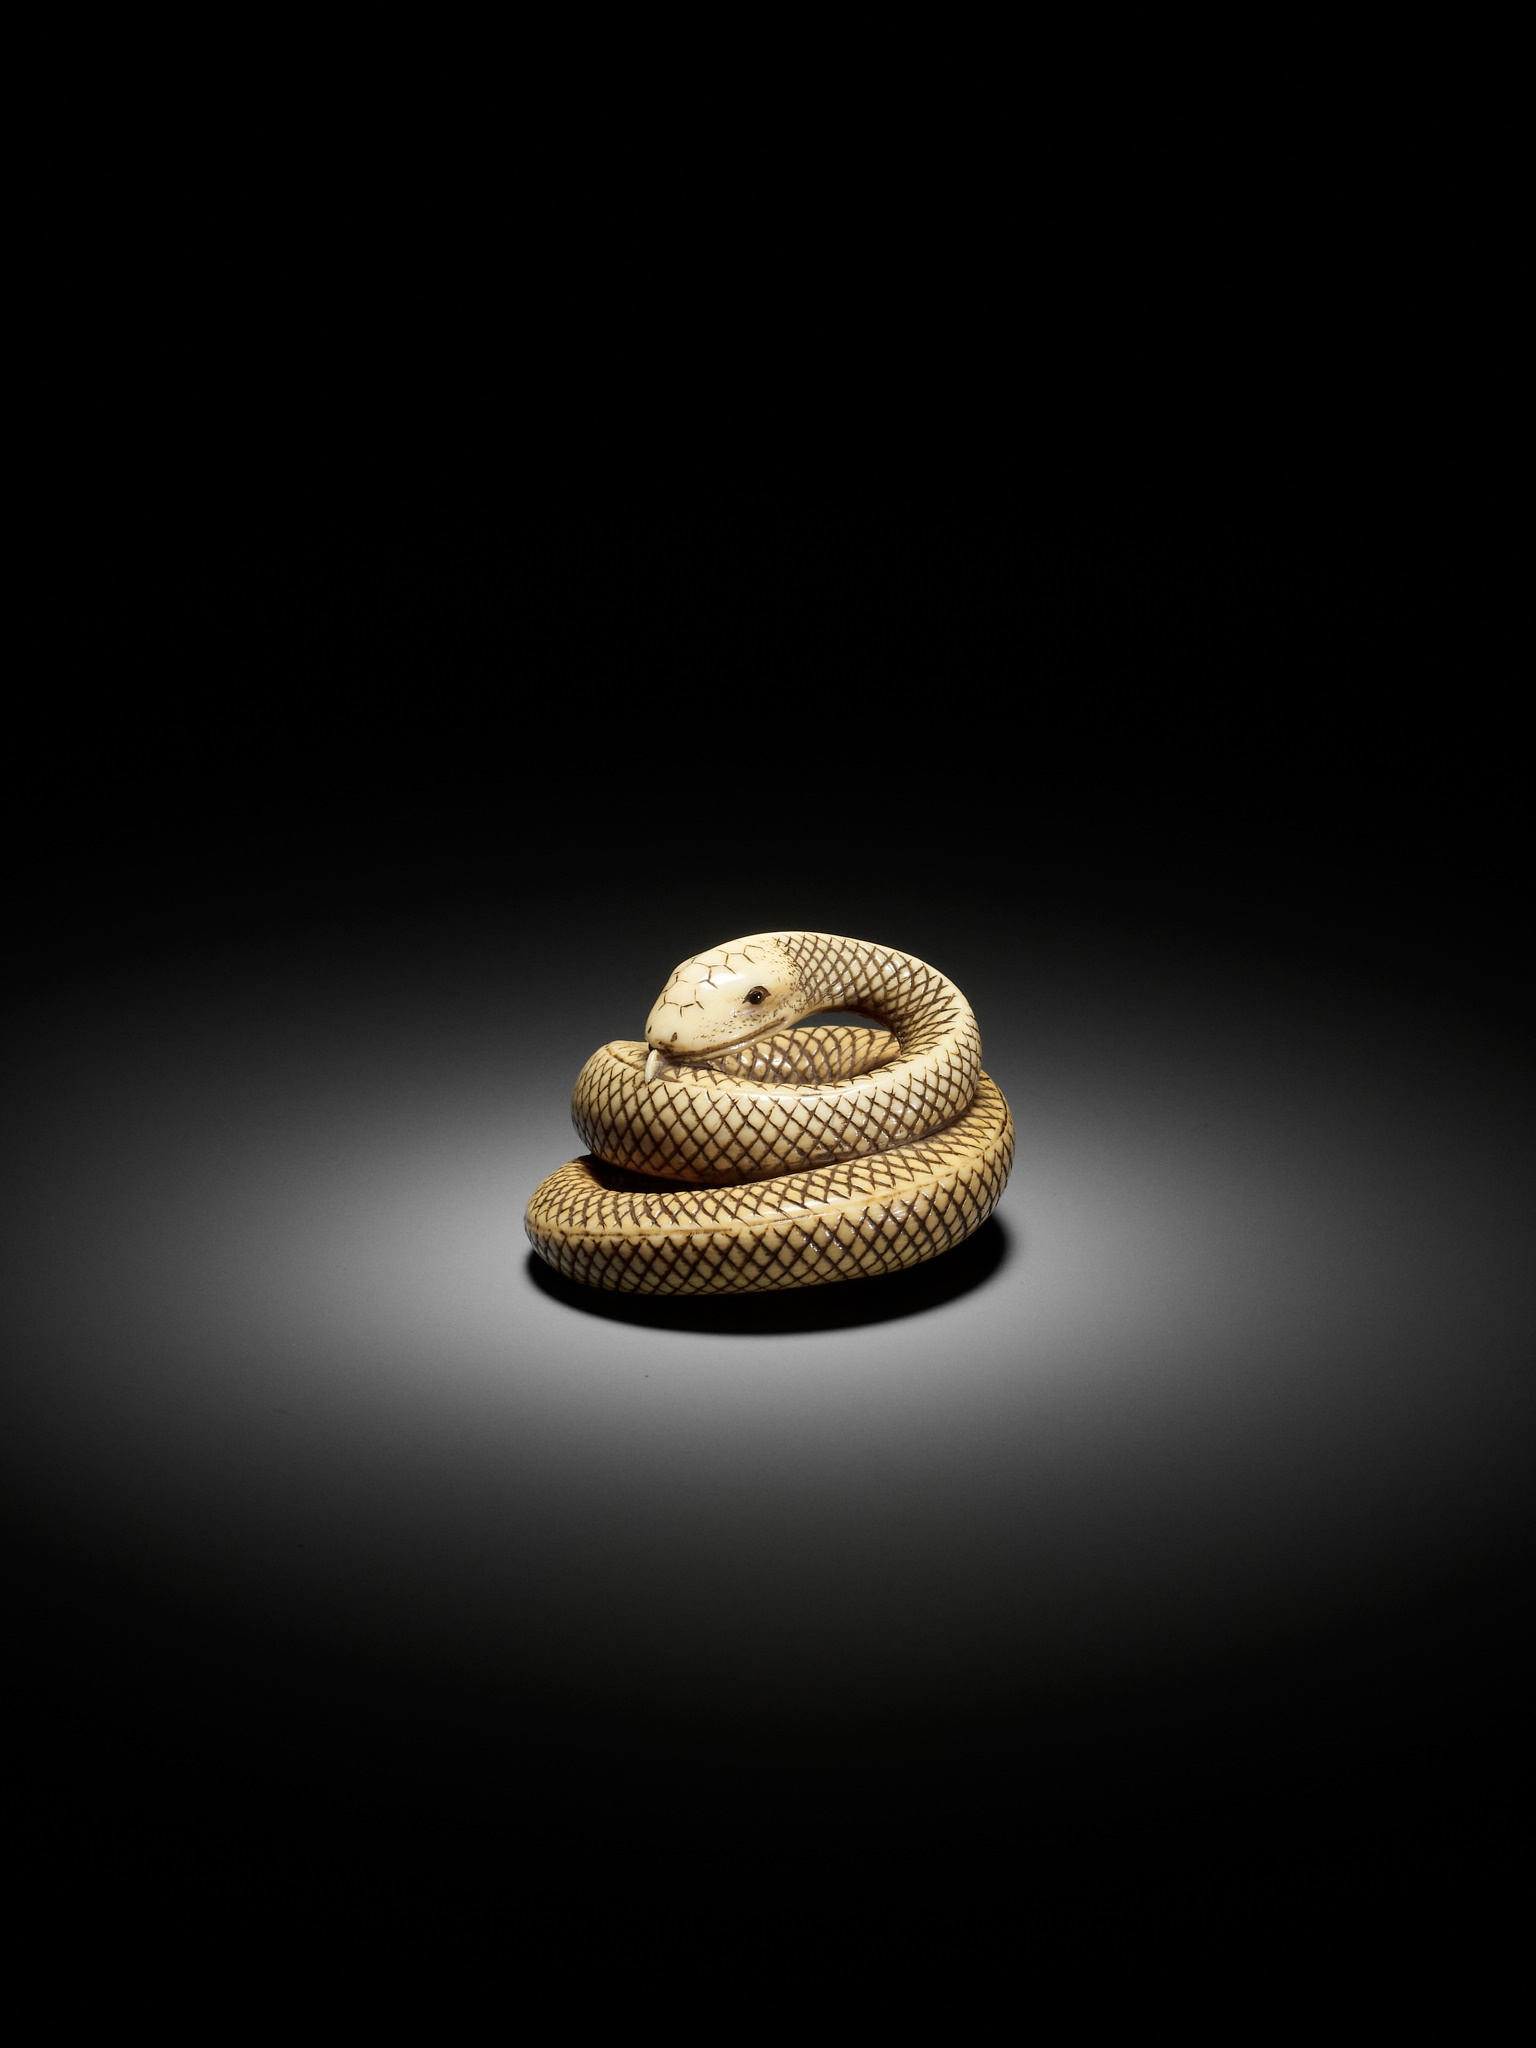 AN IVORY NETSUKE OF A COILED SNAKE, ATTRIBUTED TO OKATOMO - Image 7 of 16